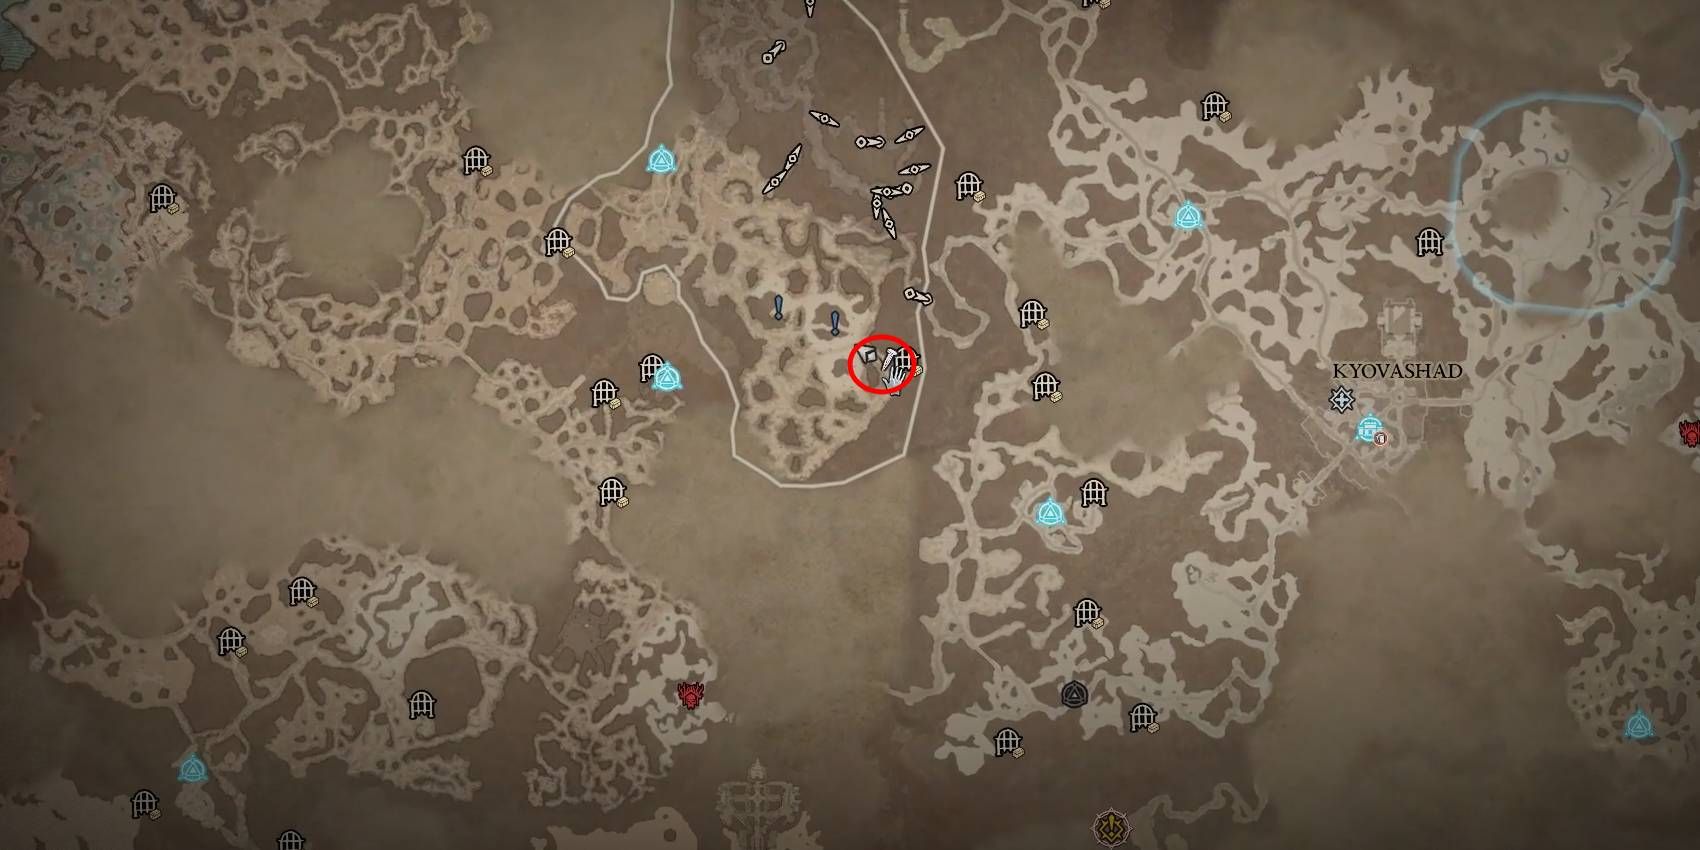 Diablo 4 Pitiless Gur Rare Elite Enemy Location on Map Marked in Red Circle